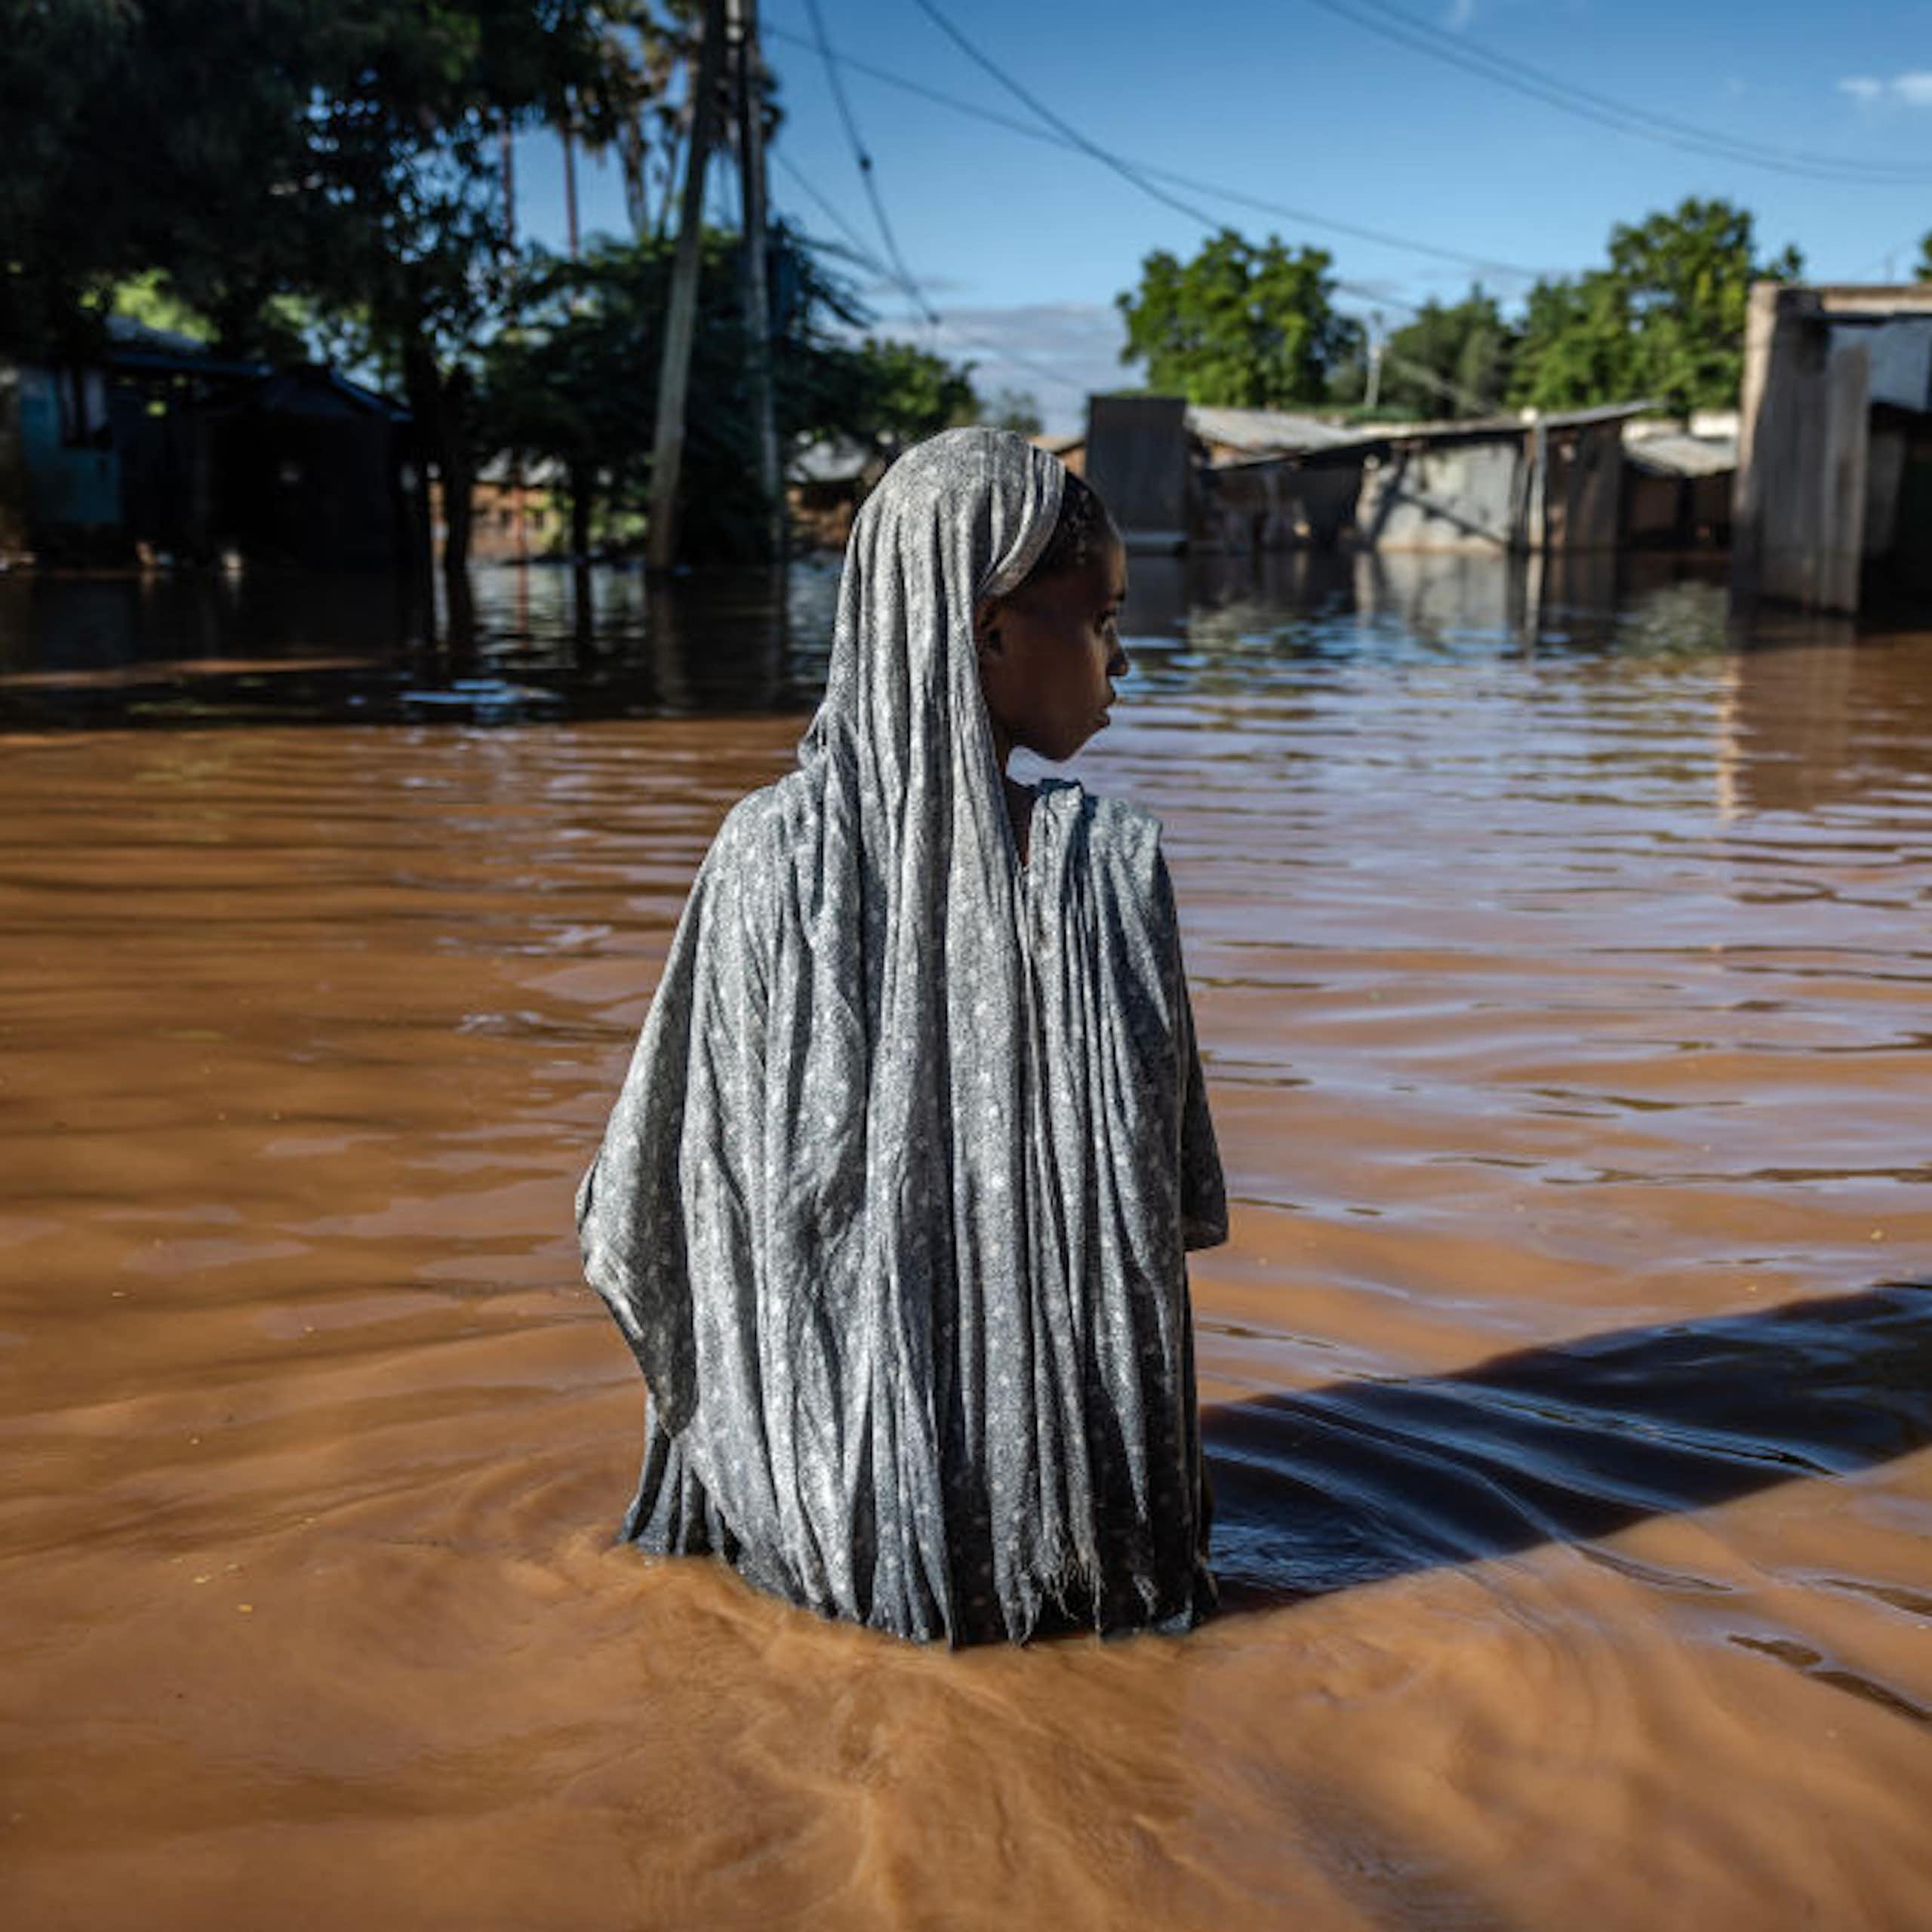 A solitary woman surrounded by waist deep flood water in flood waters look to one side.